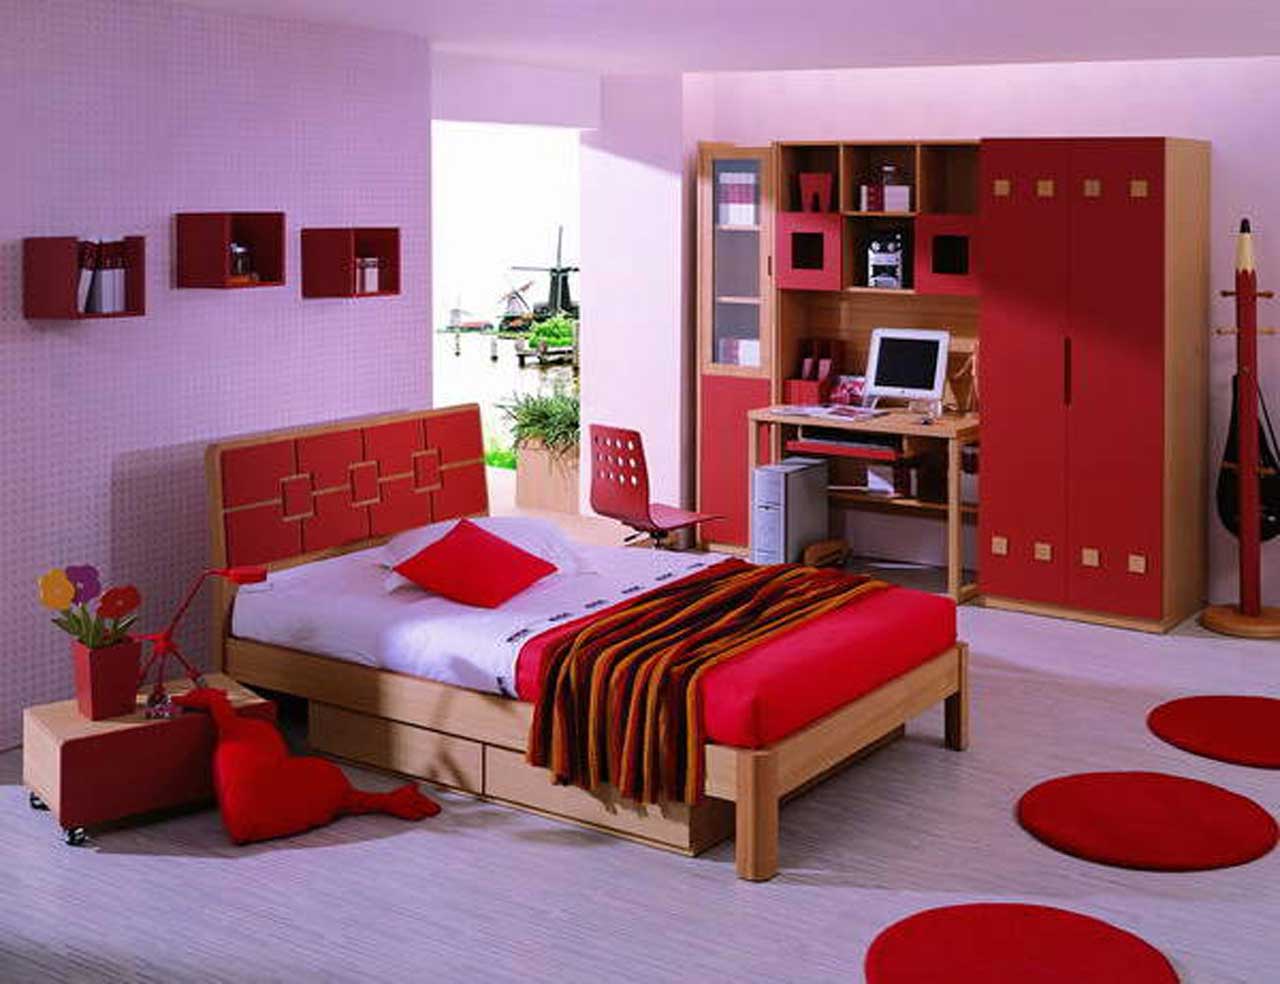 Charming Kids Room Decor Red Color Design Ideas With Cute Purple Ceramic Floor Tile Patterns Also Simple Wood Bed Frame Designs Plus Creative Bookshelf Ideas For Limited Space Design